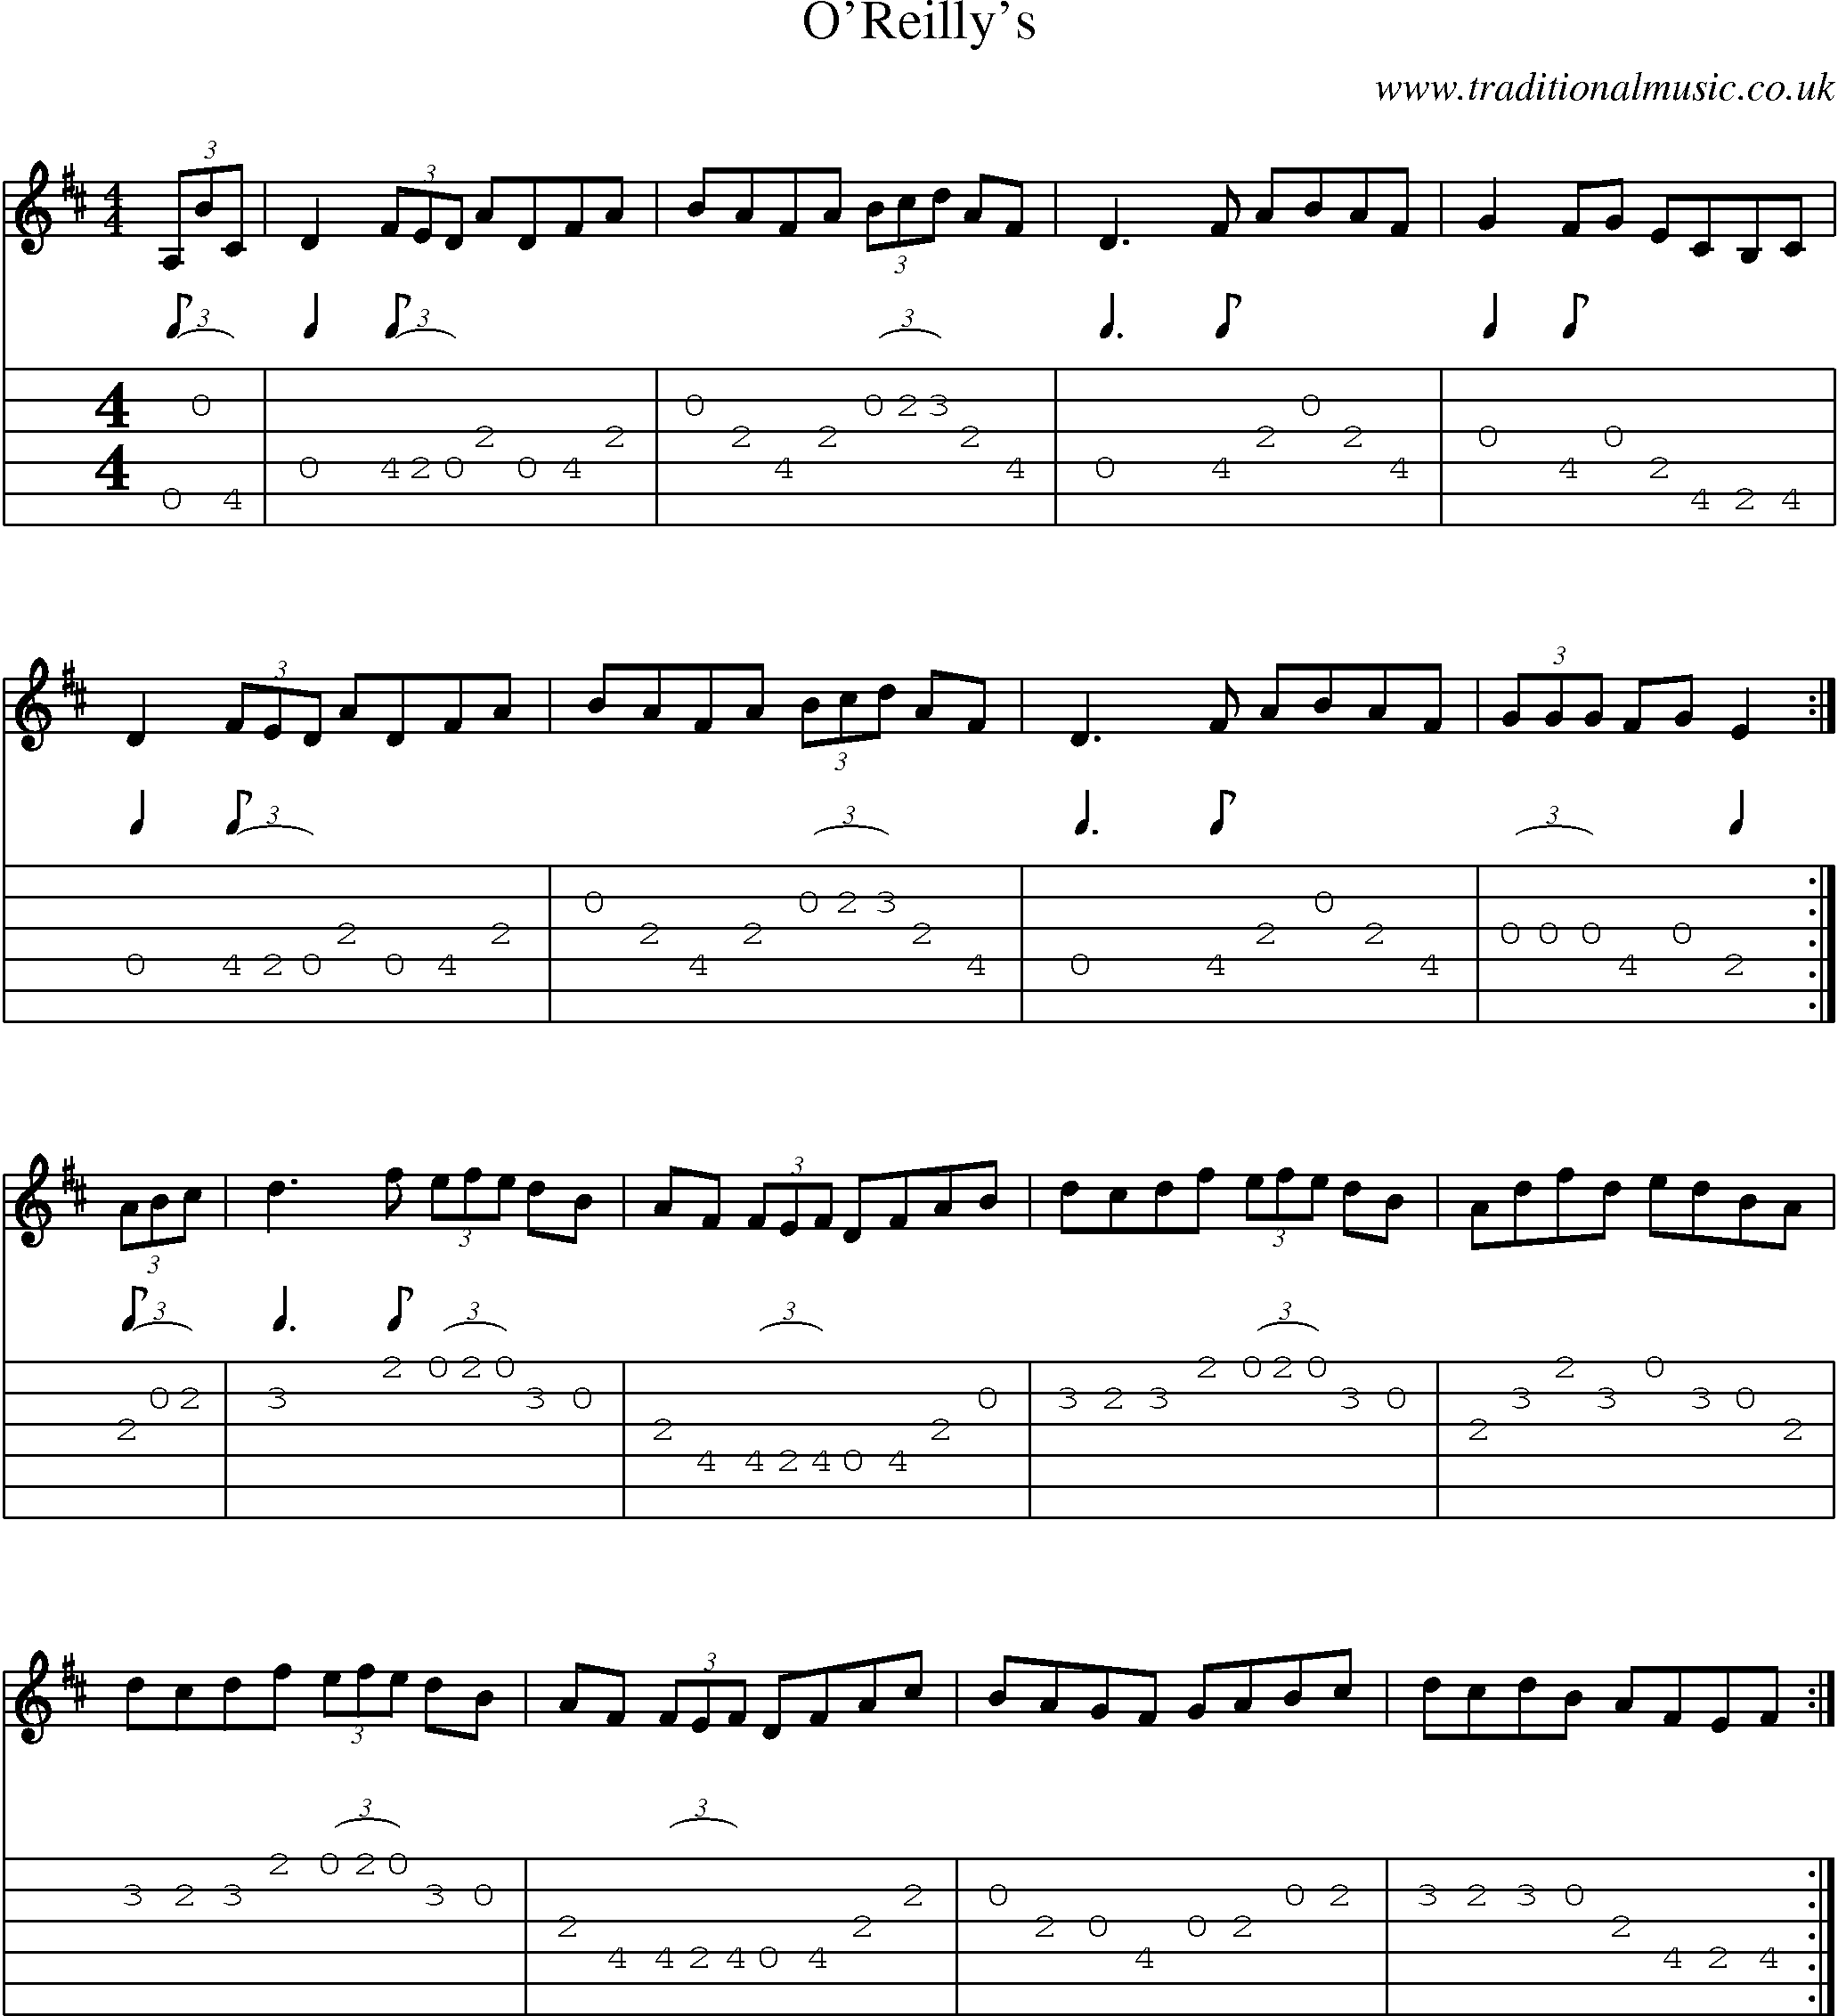 Music Score and Guitar Tabs for Oreillys